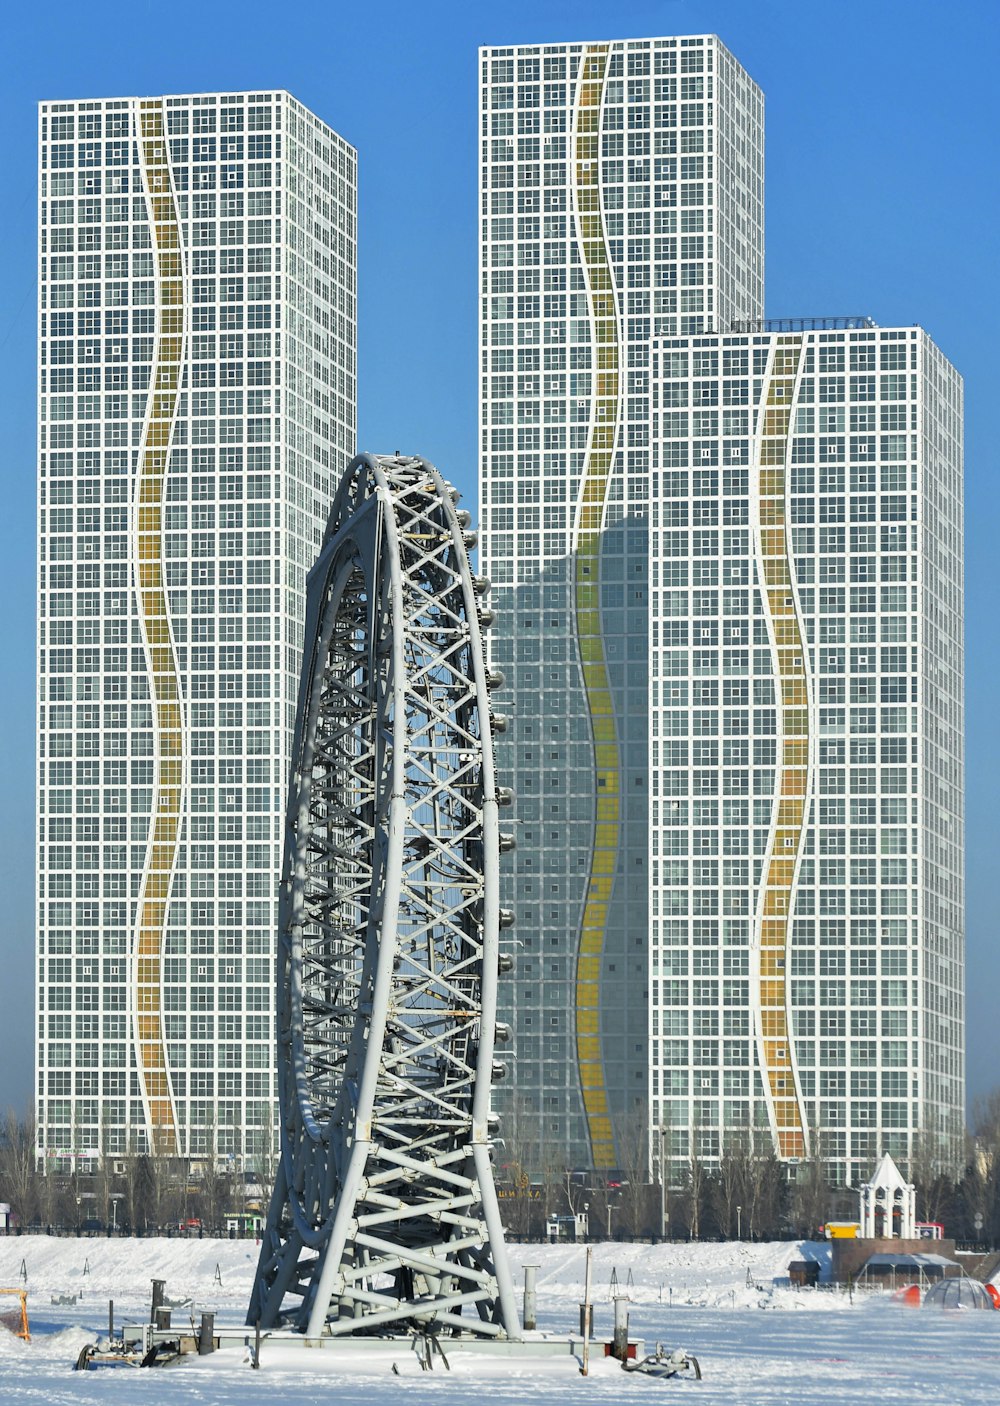 a ferris wheel in front of some tall buildings